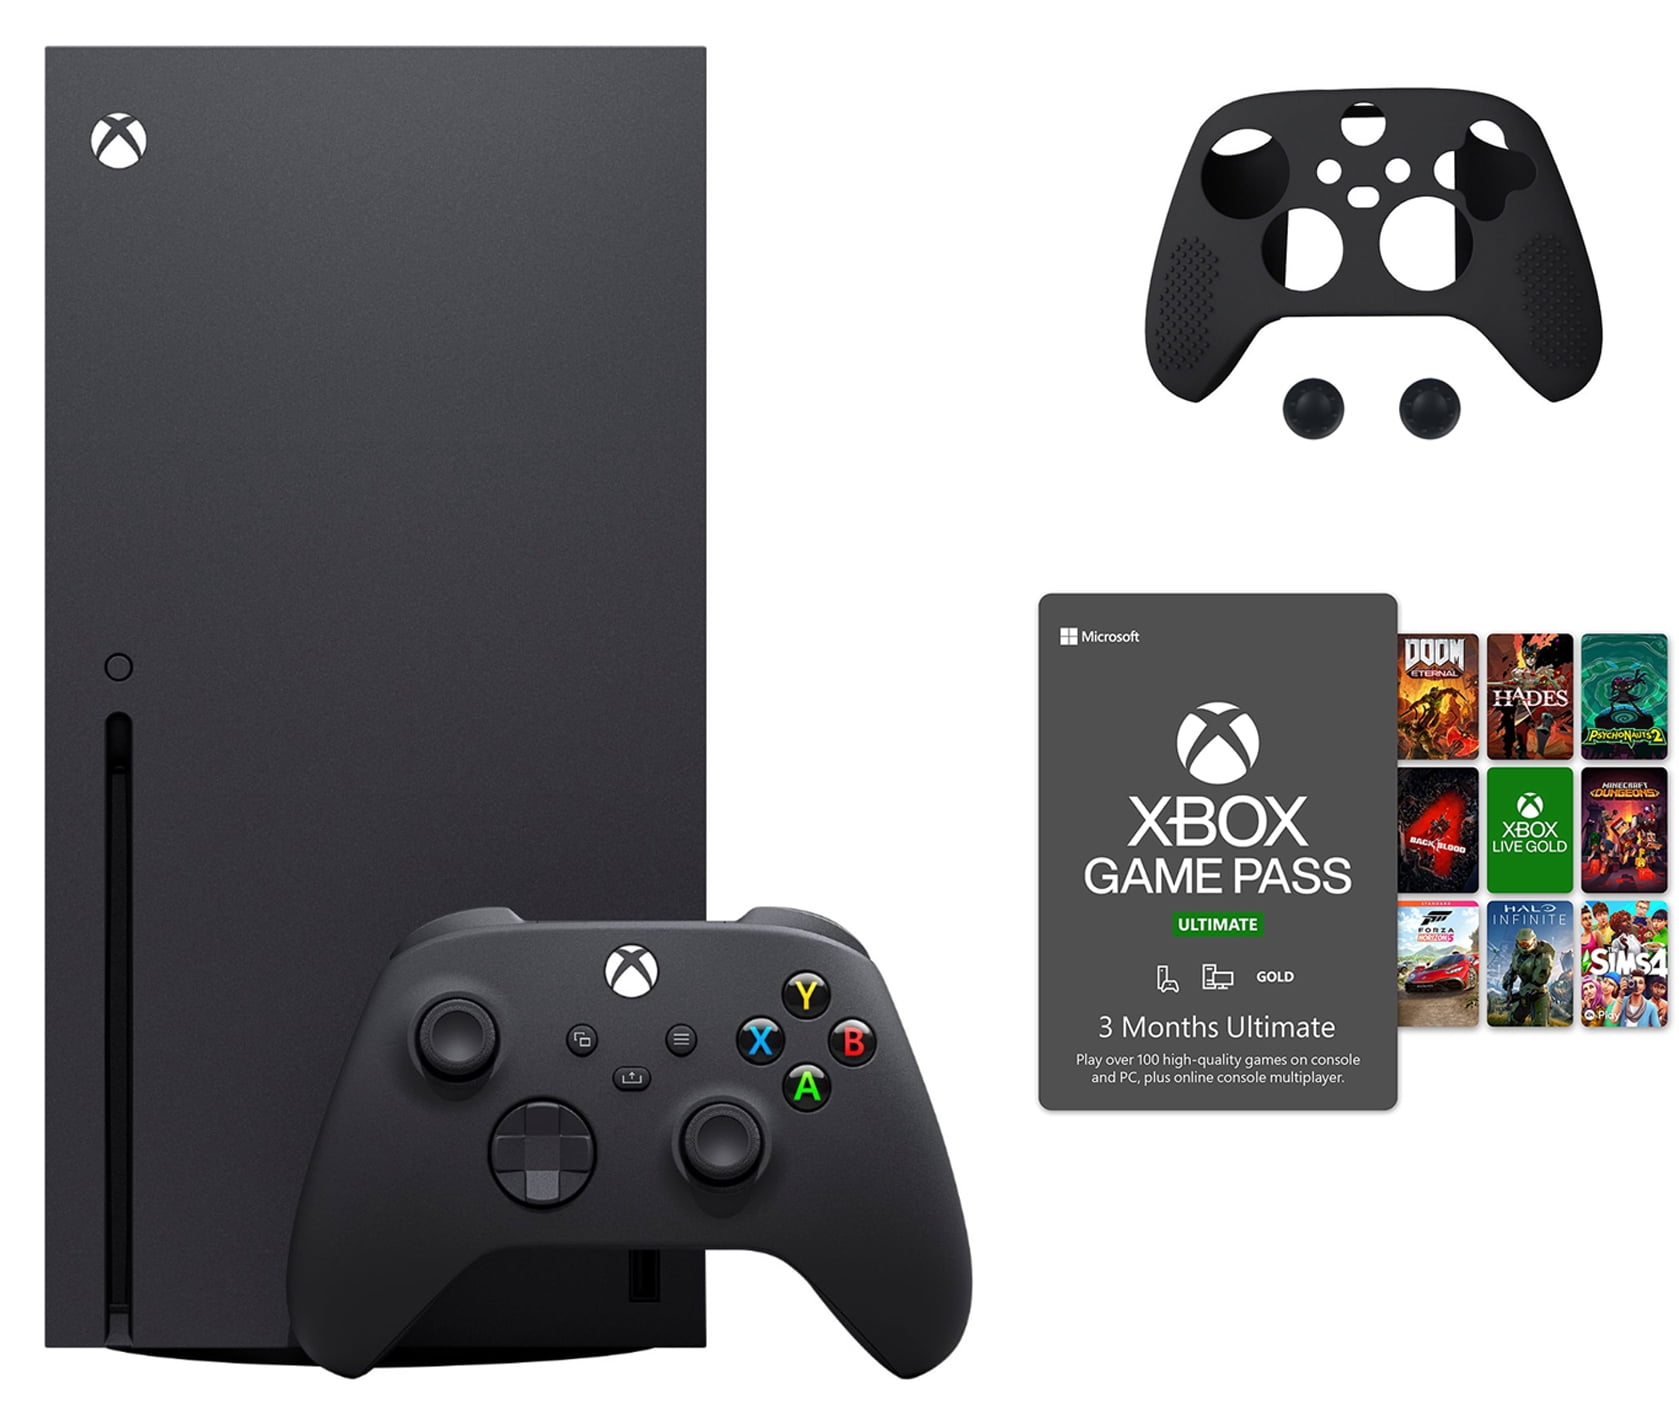  Xbox Series X & Game Pass Ultimate: 3 Months